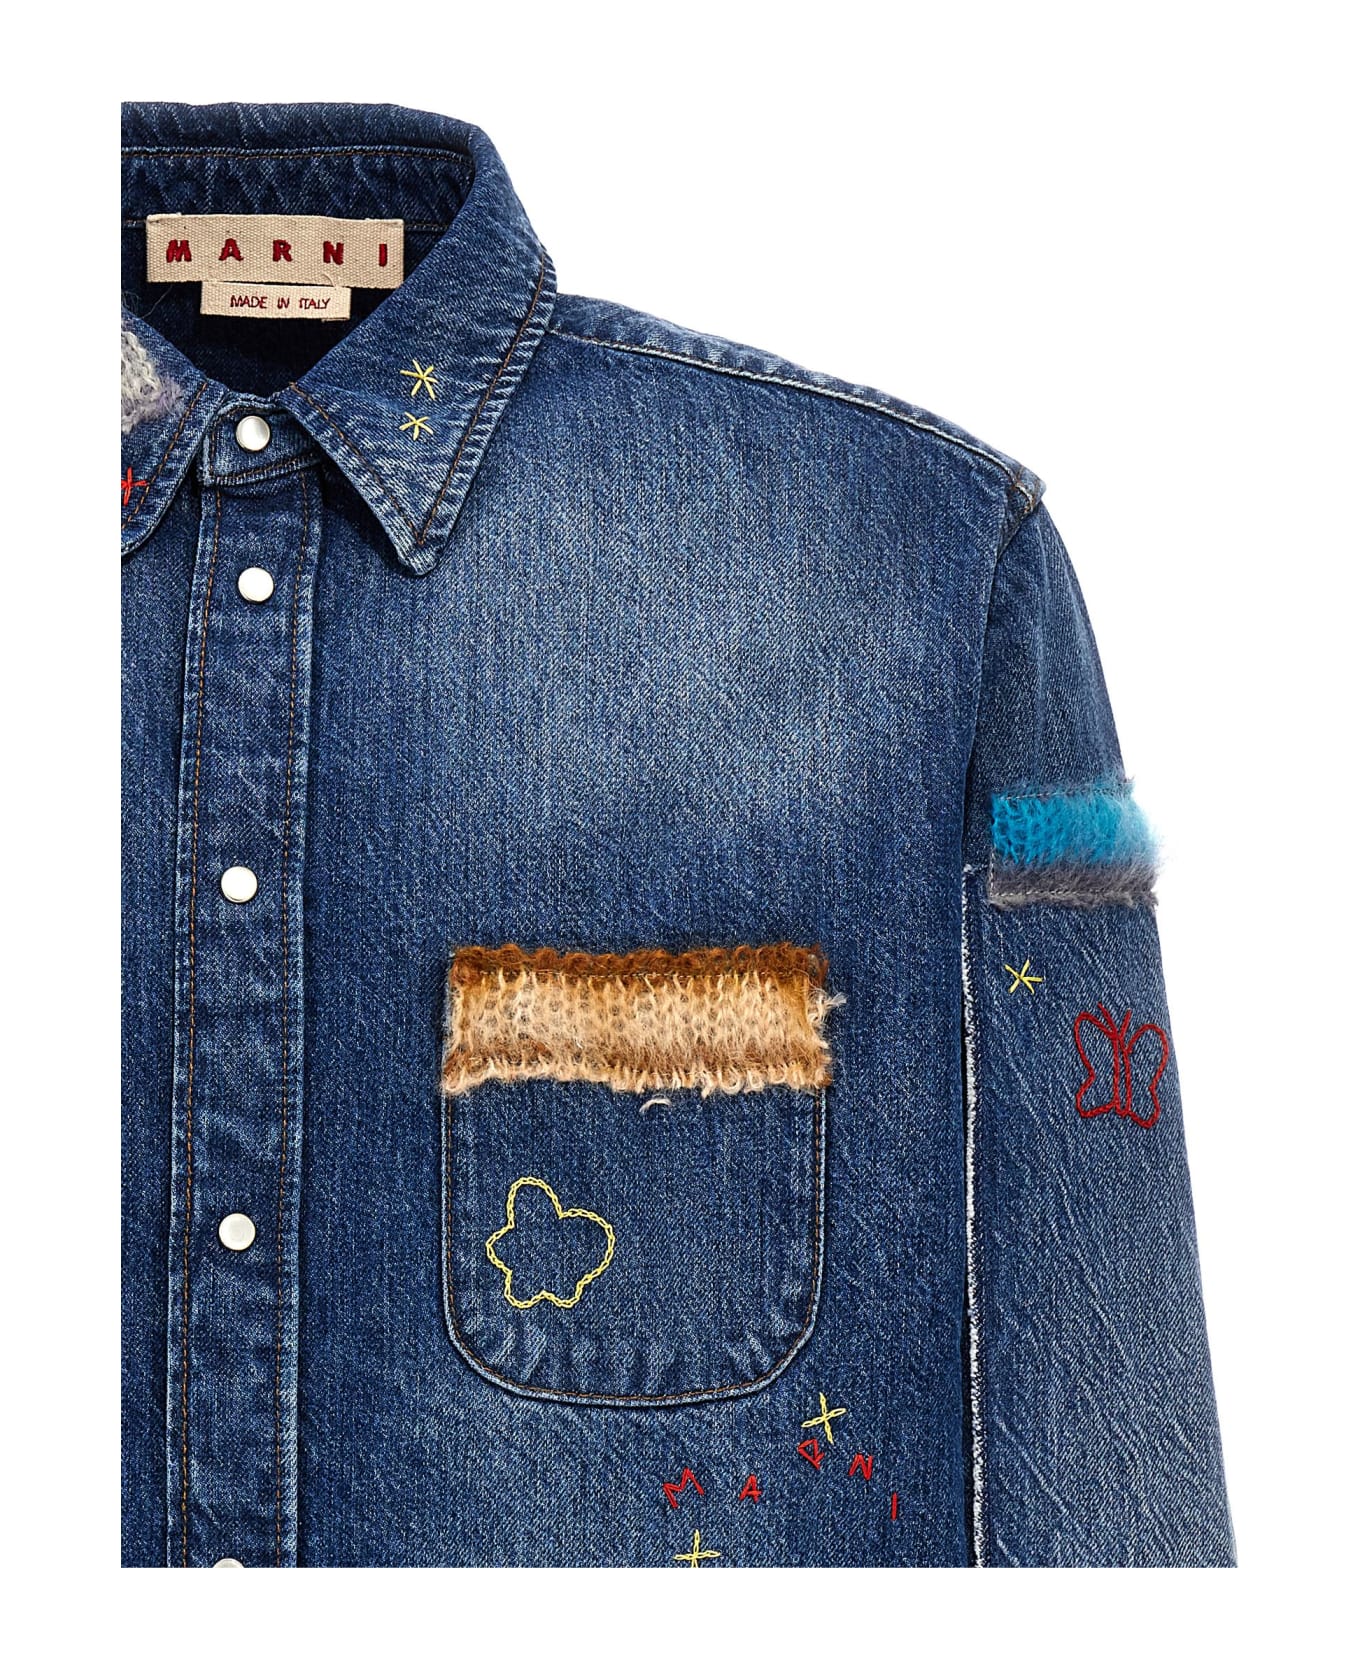 Marni Denim Shirt, Embroidery And Patches - Blu シャツ